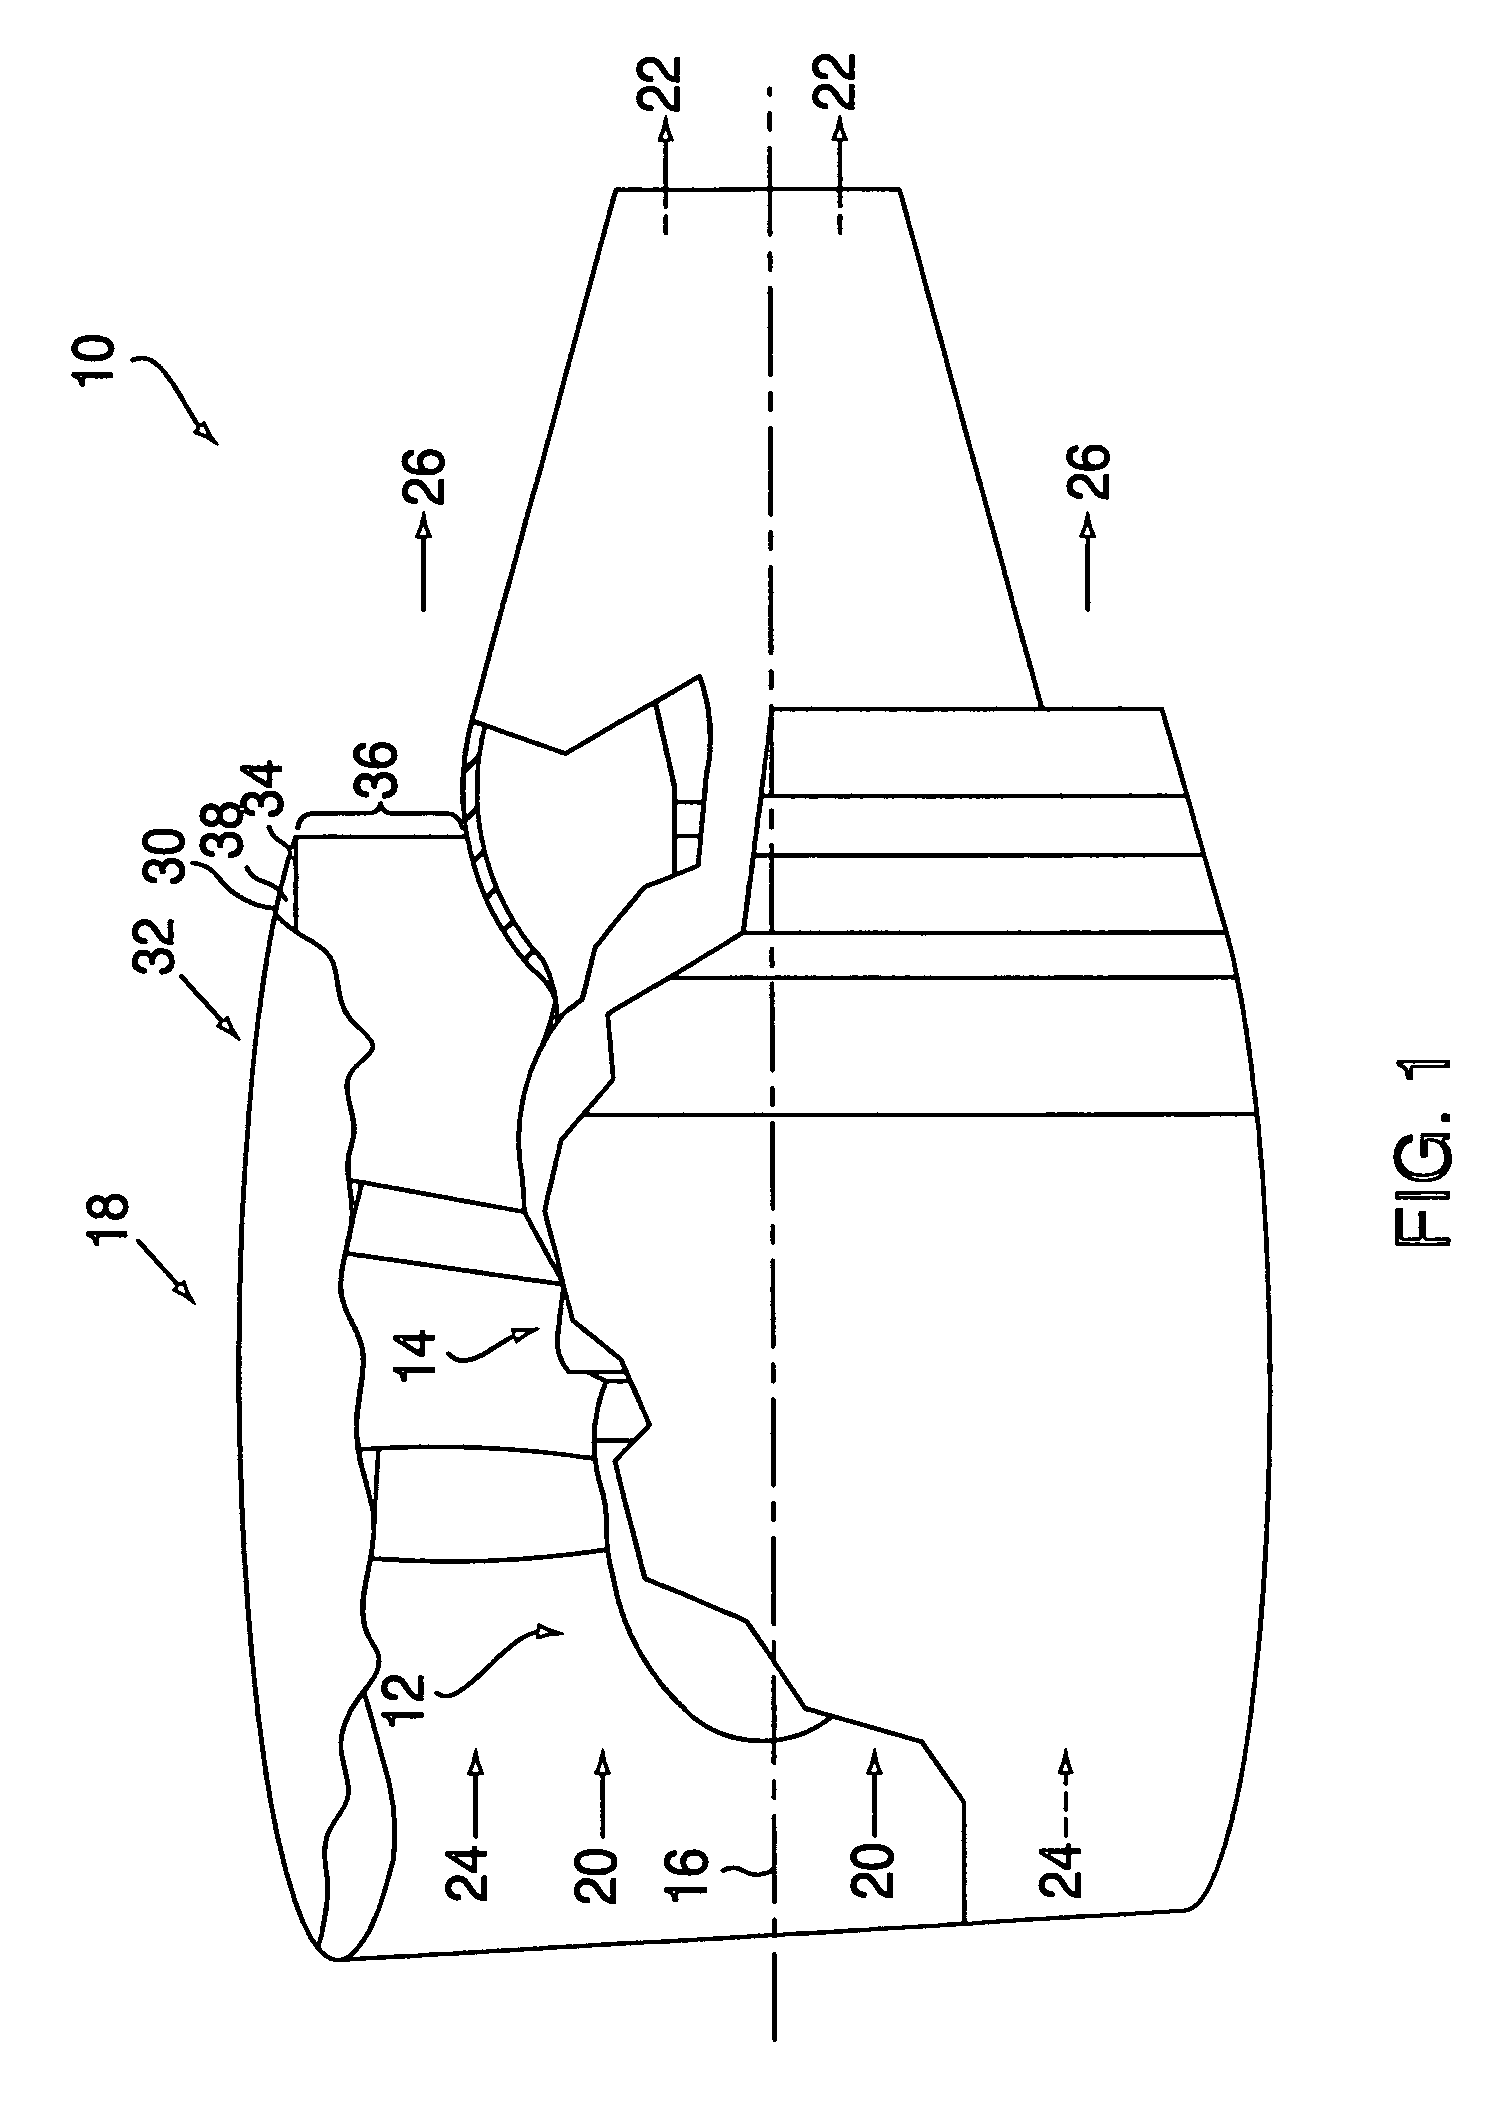 Variable area nozzle for gas turbine engines driven by shape memory alloy actuators